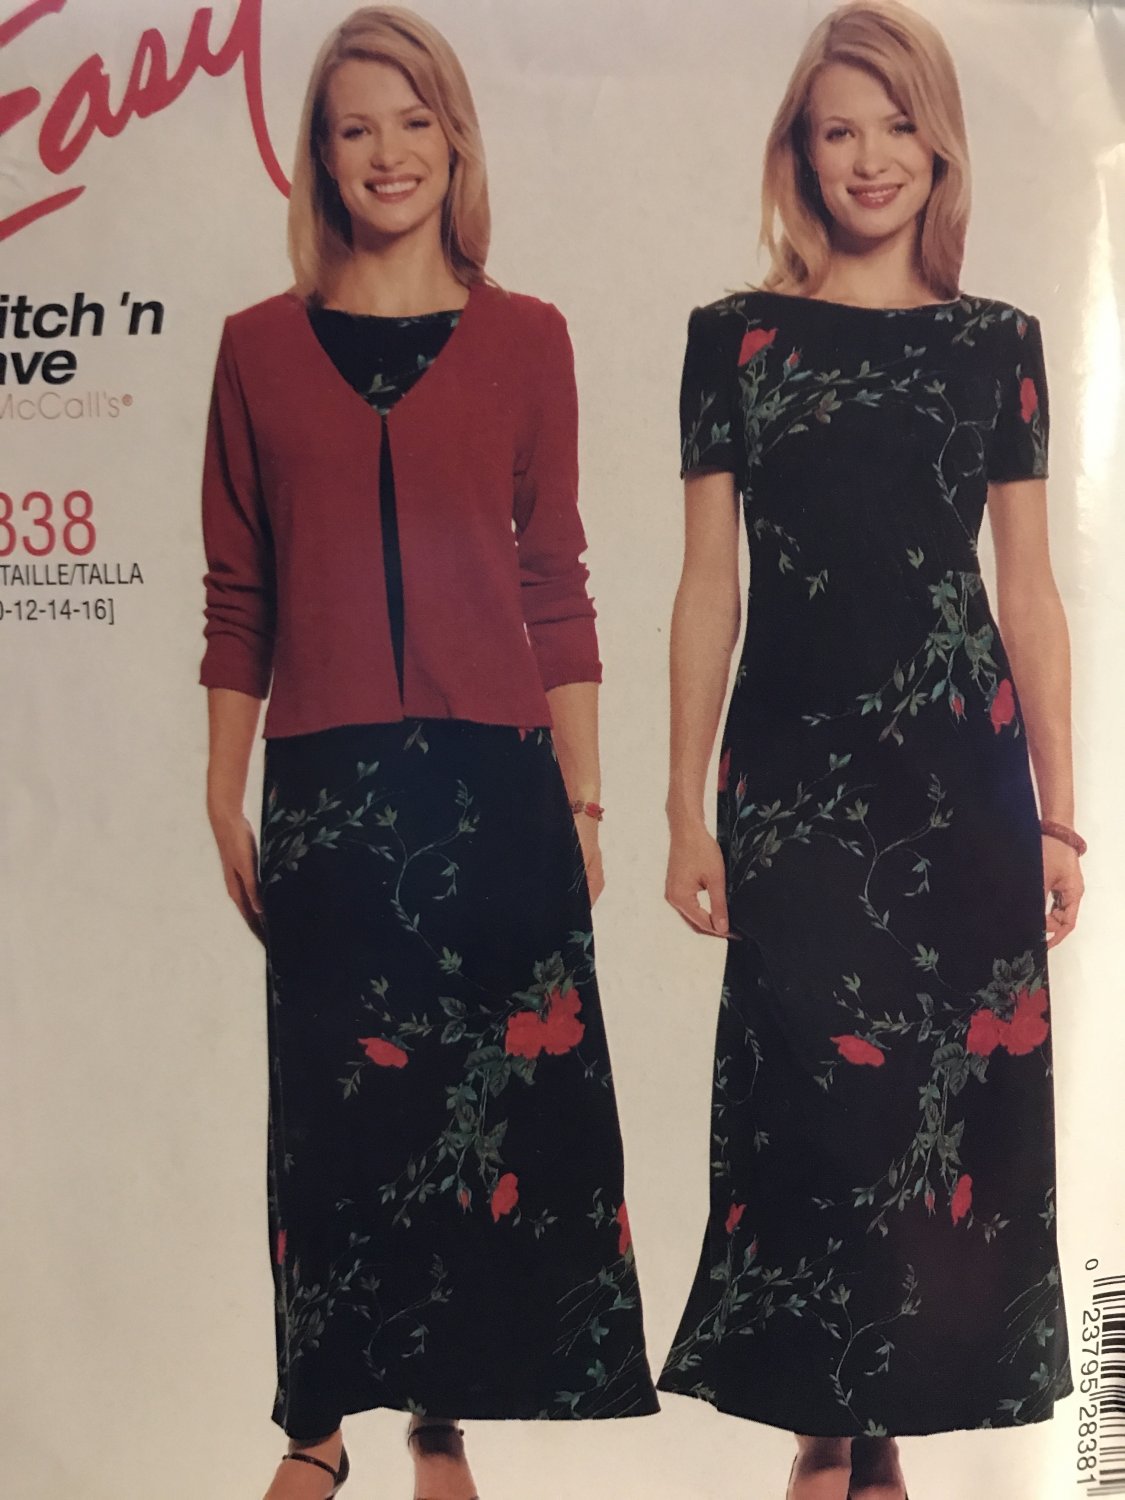 McCall's 2838 Misses' dress with jacket sewing pattern Size 10 - 16 easy stitch 'n save